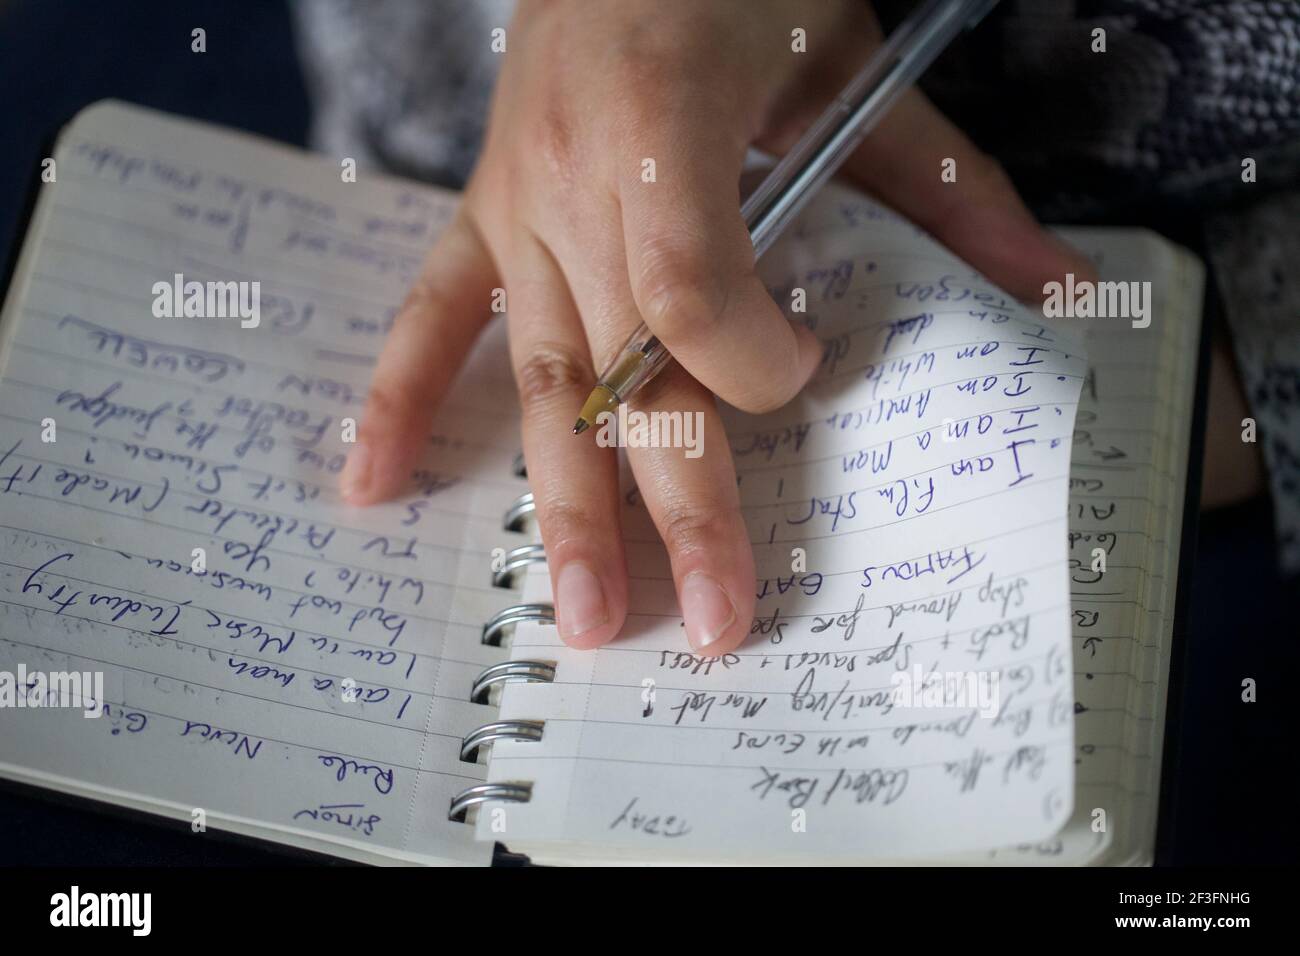 Woman`s hands writing with a pen Stock Photo